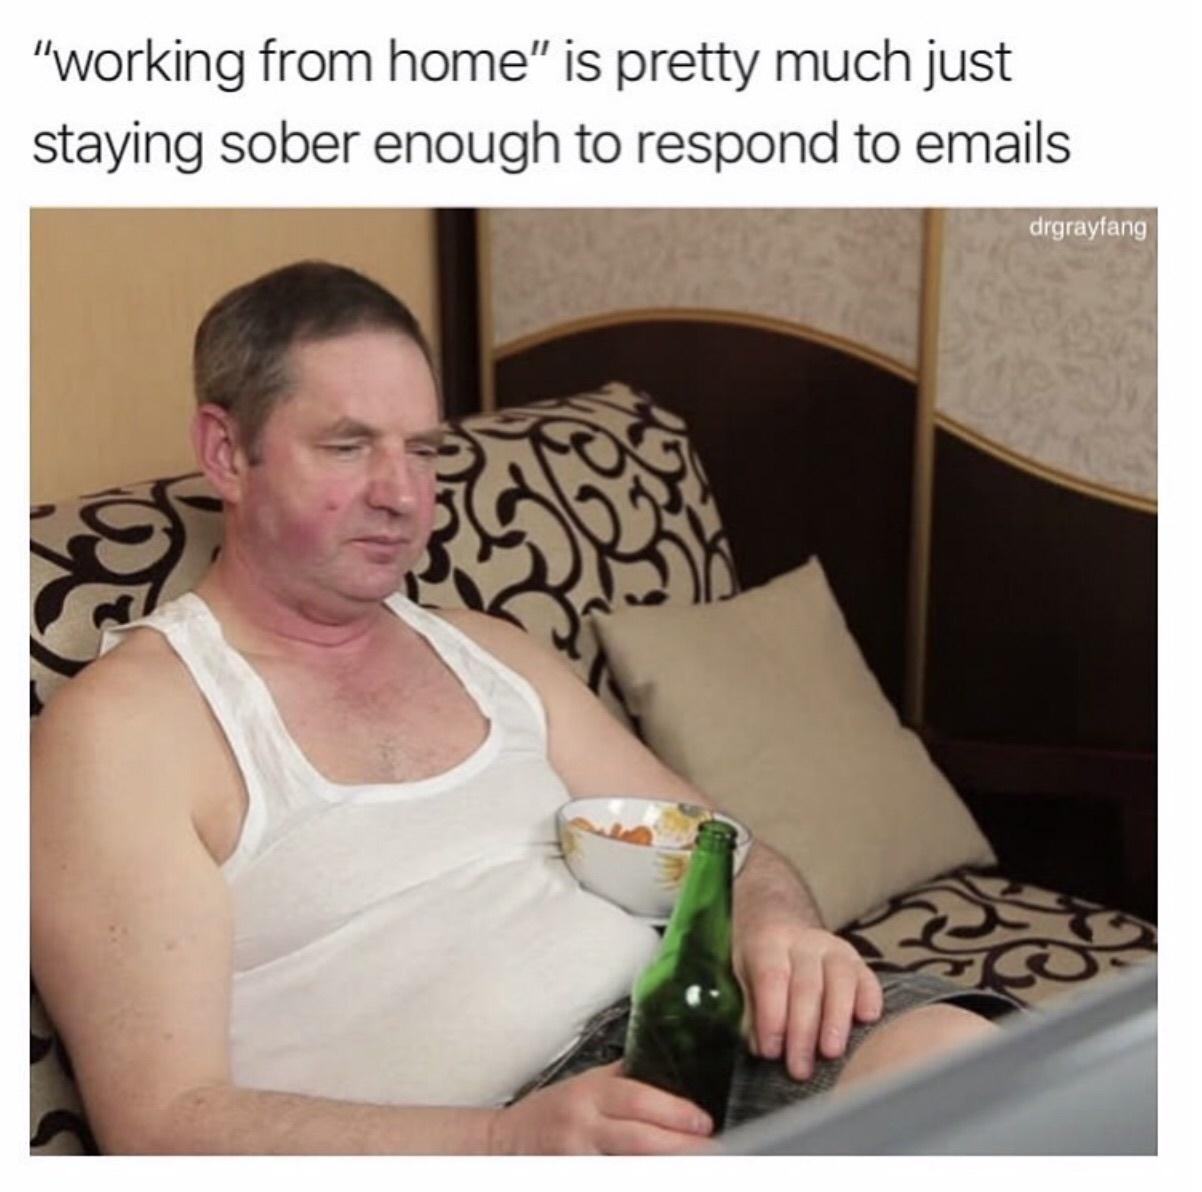 working from home sober meme - "working from home" is pretty much just staying sober enough to respond to emails drgrayfang